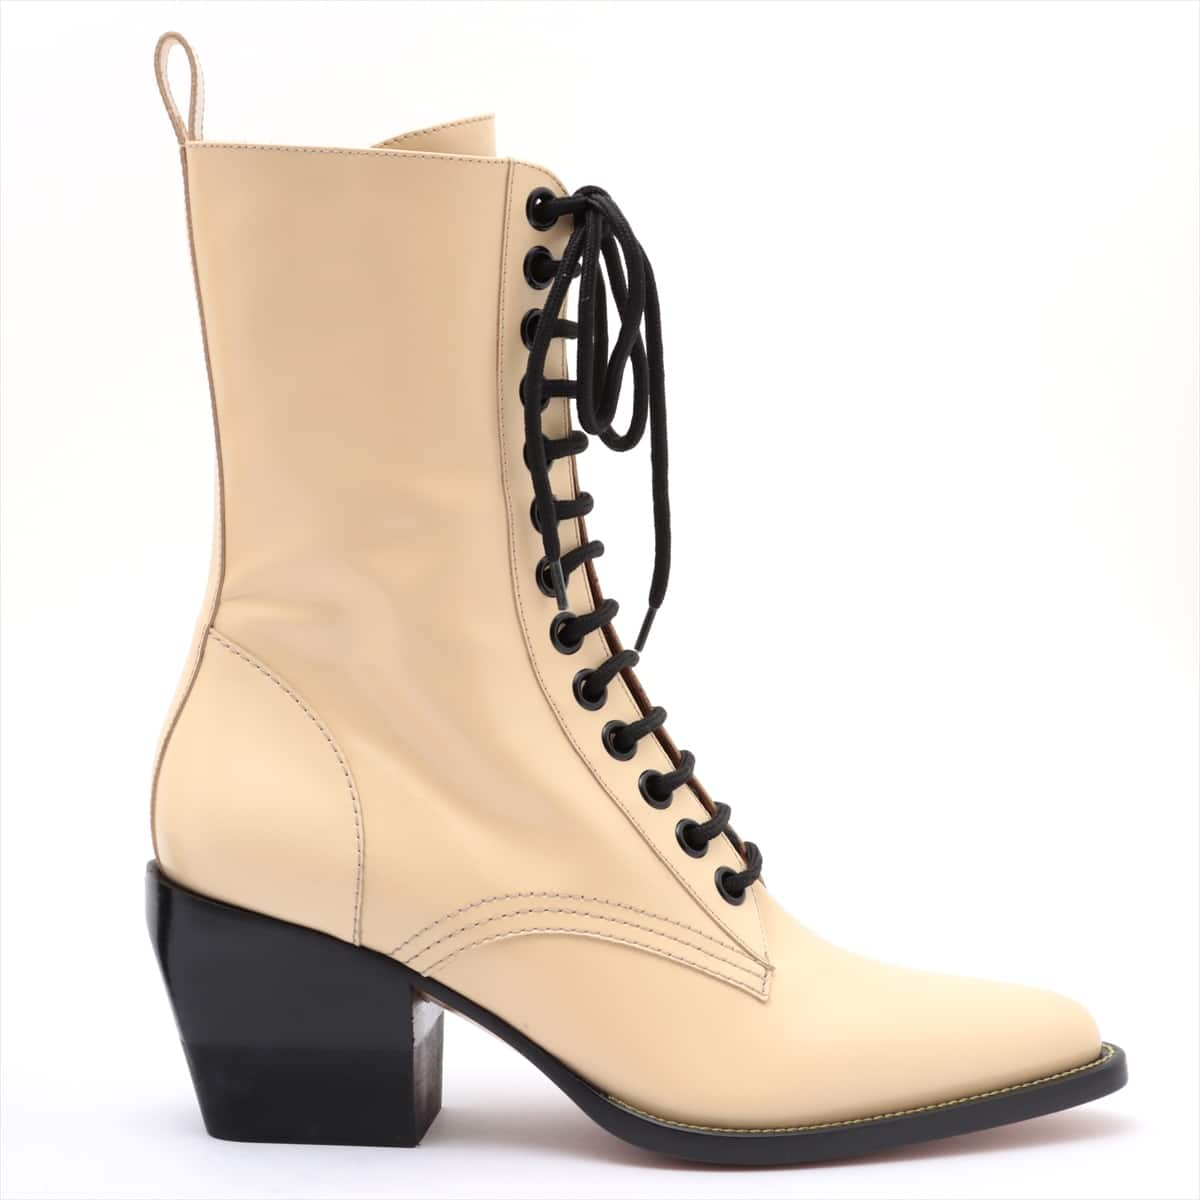 Chloe Leather Boots 40 Men's Yellow gold